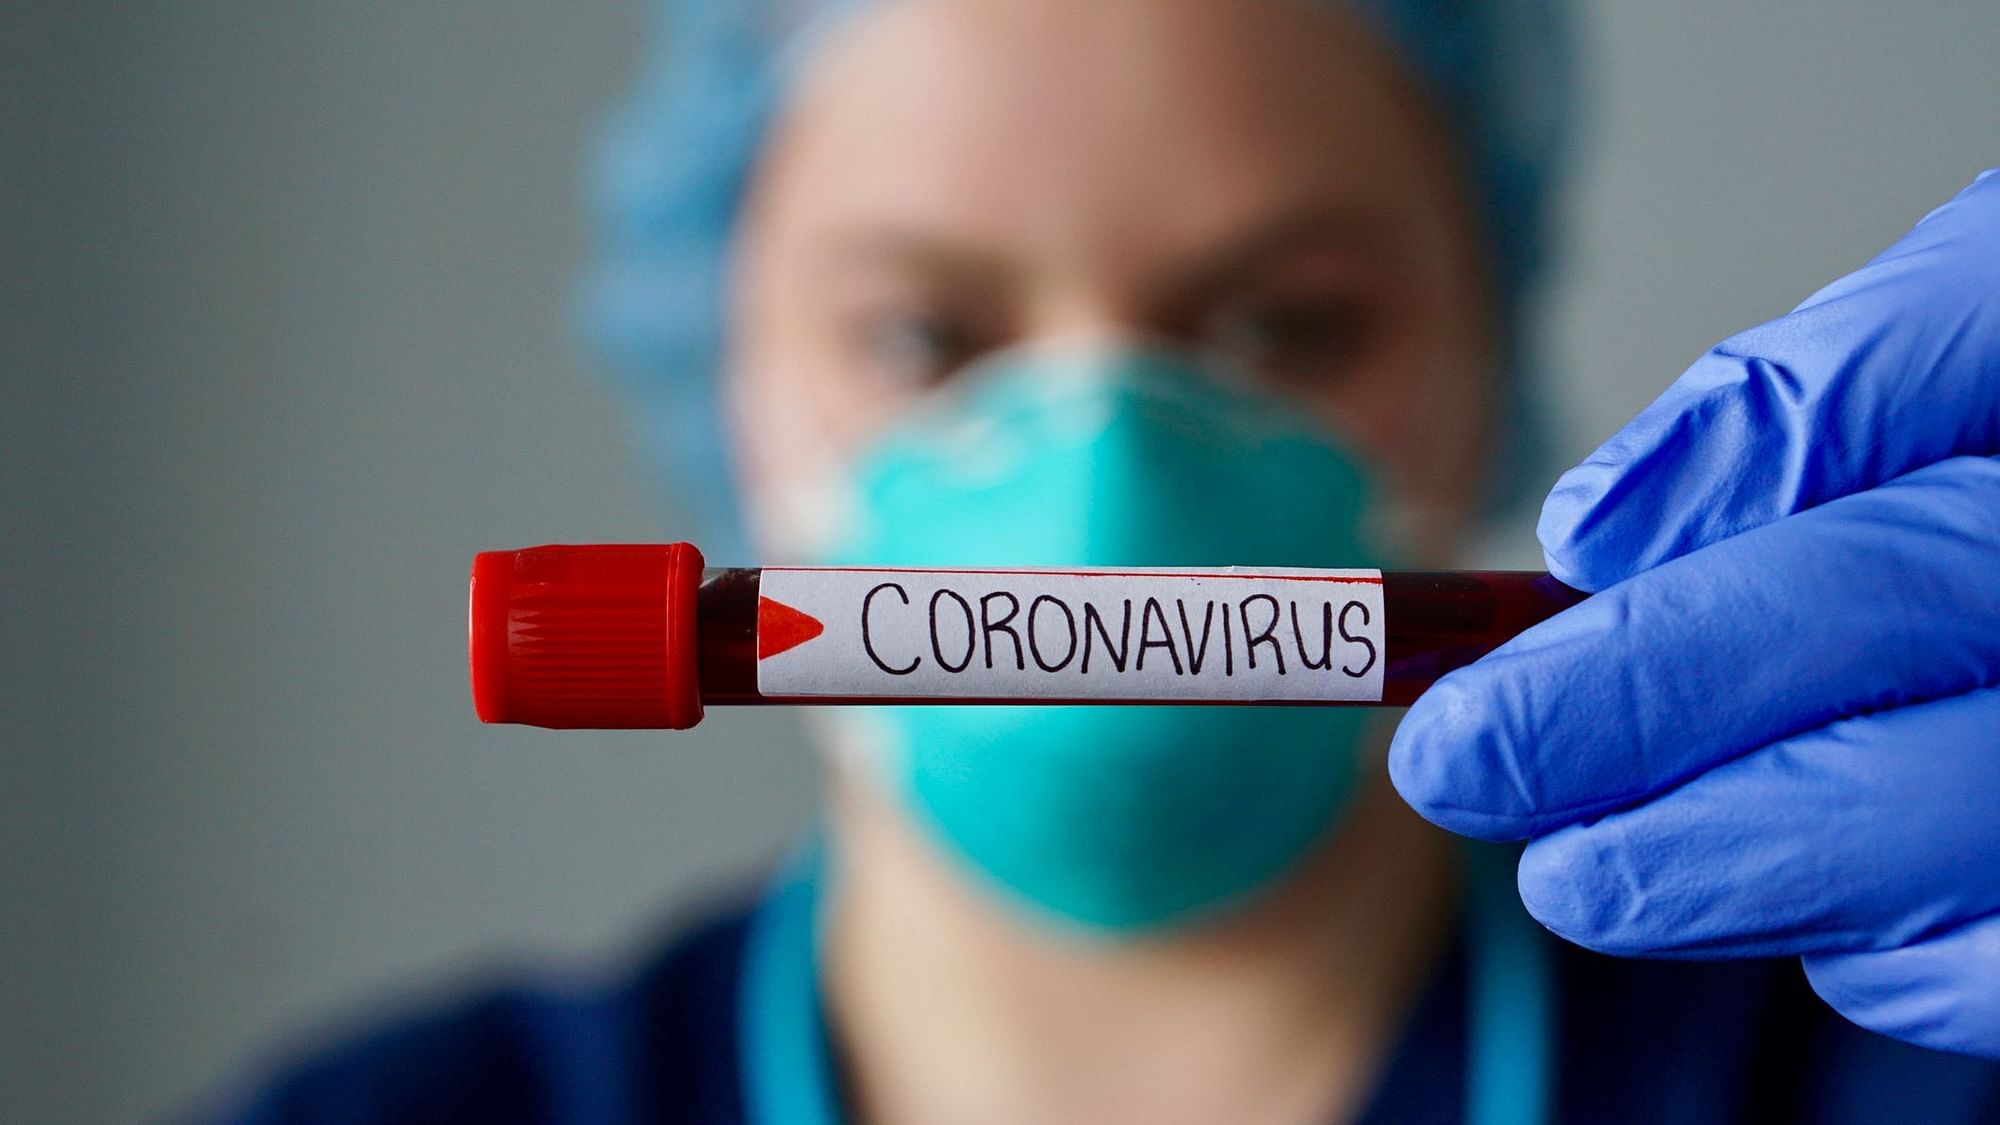 As of Thursday, 26 March, India has recored total 649 positive cases of coronavirus and 13 deaths. 